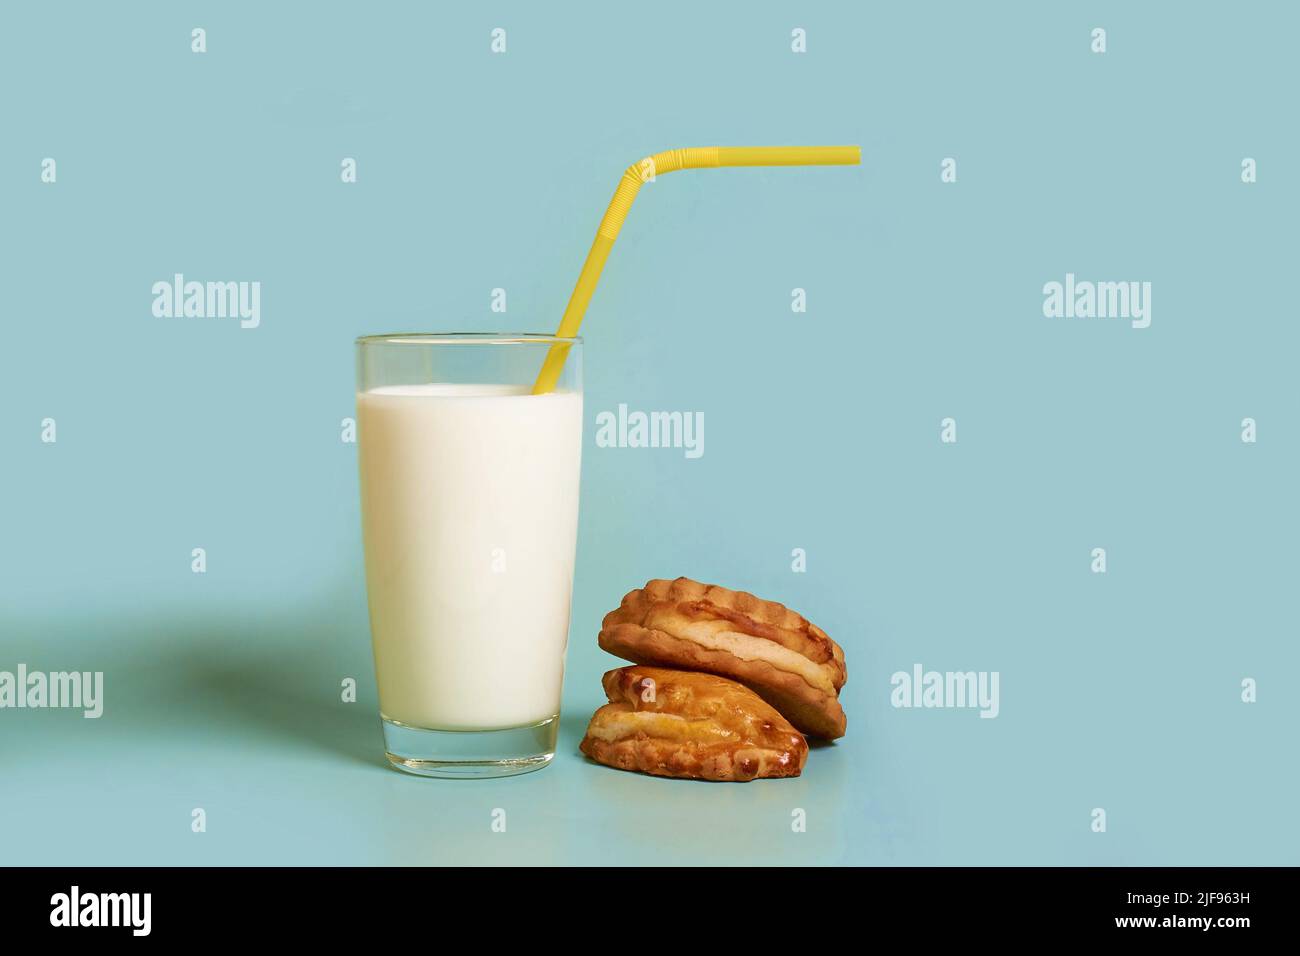 A glass of milk, plastic tube and cakes  Stock Photo